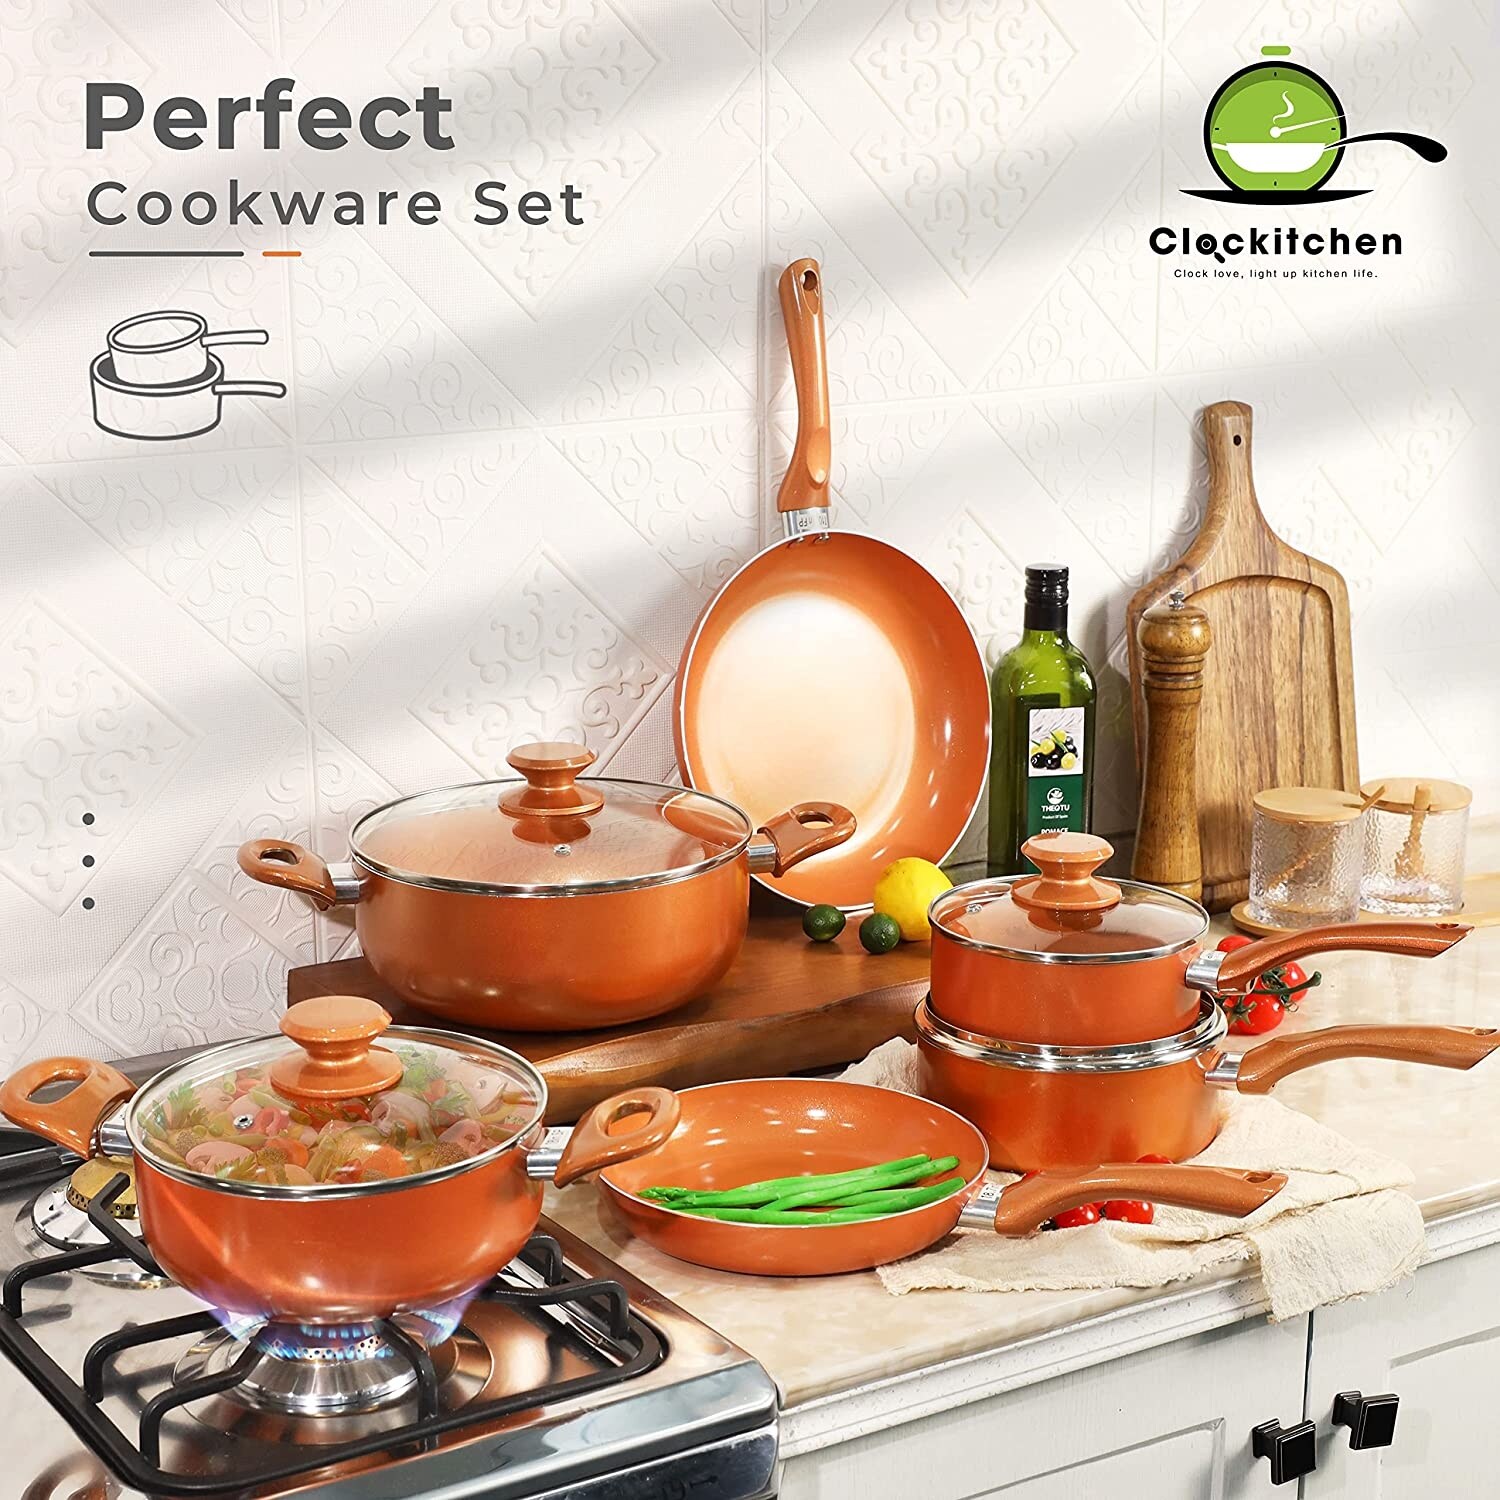 https://ak1.ostkcdn.com/images/products/is/images/direct/fd6fa7ea58aacd4e1a588cf5789ae8f6b5660209/6-piece-Non-stick-Cookware-Set-Pots-and-Pans-Set-for-Cooking---Ceramic-Coating-Saucepan%2C-Stock-Pot-with-Lid%2C-Frying-Pan%2C-Copper.jpg